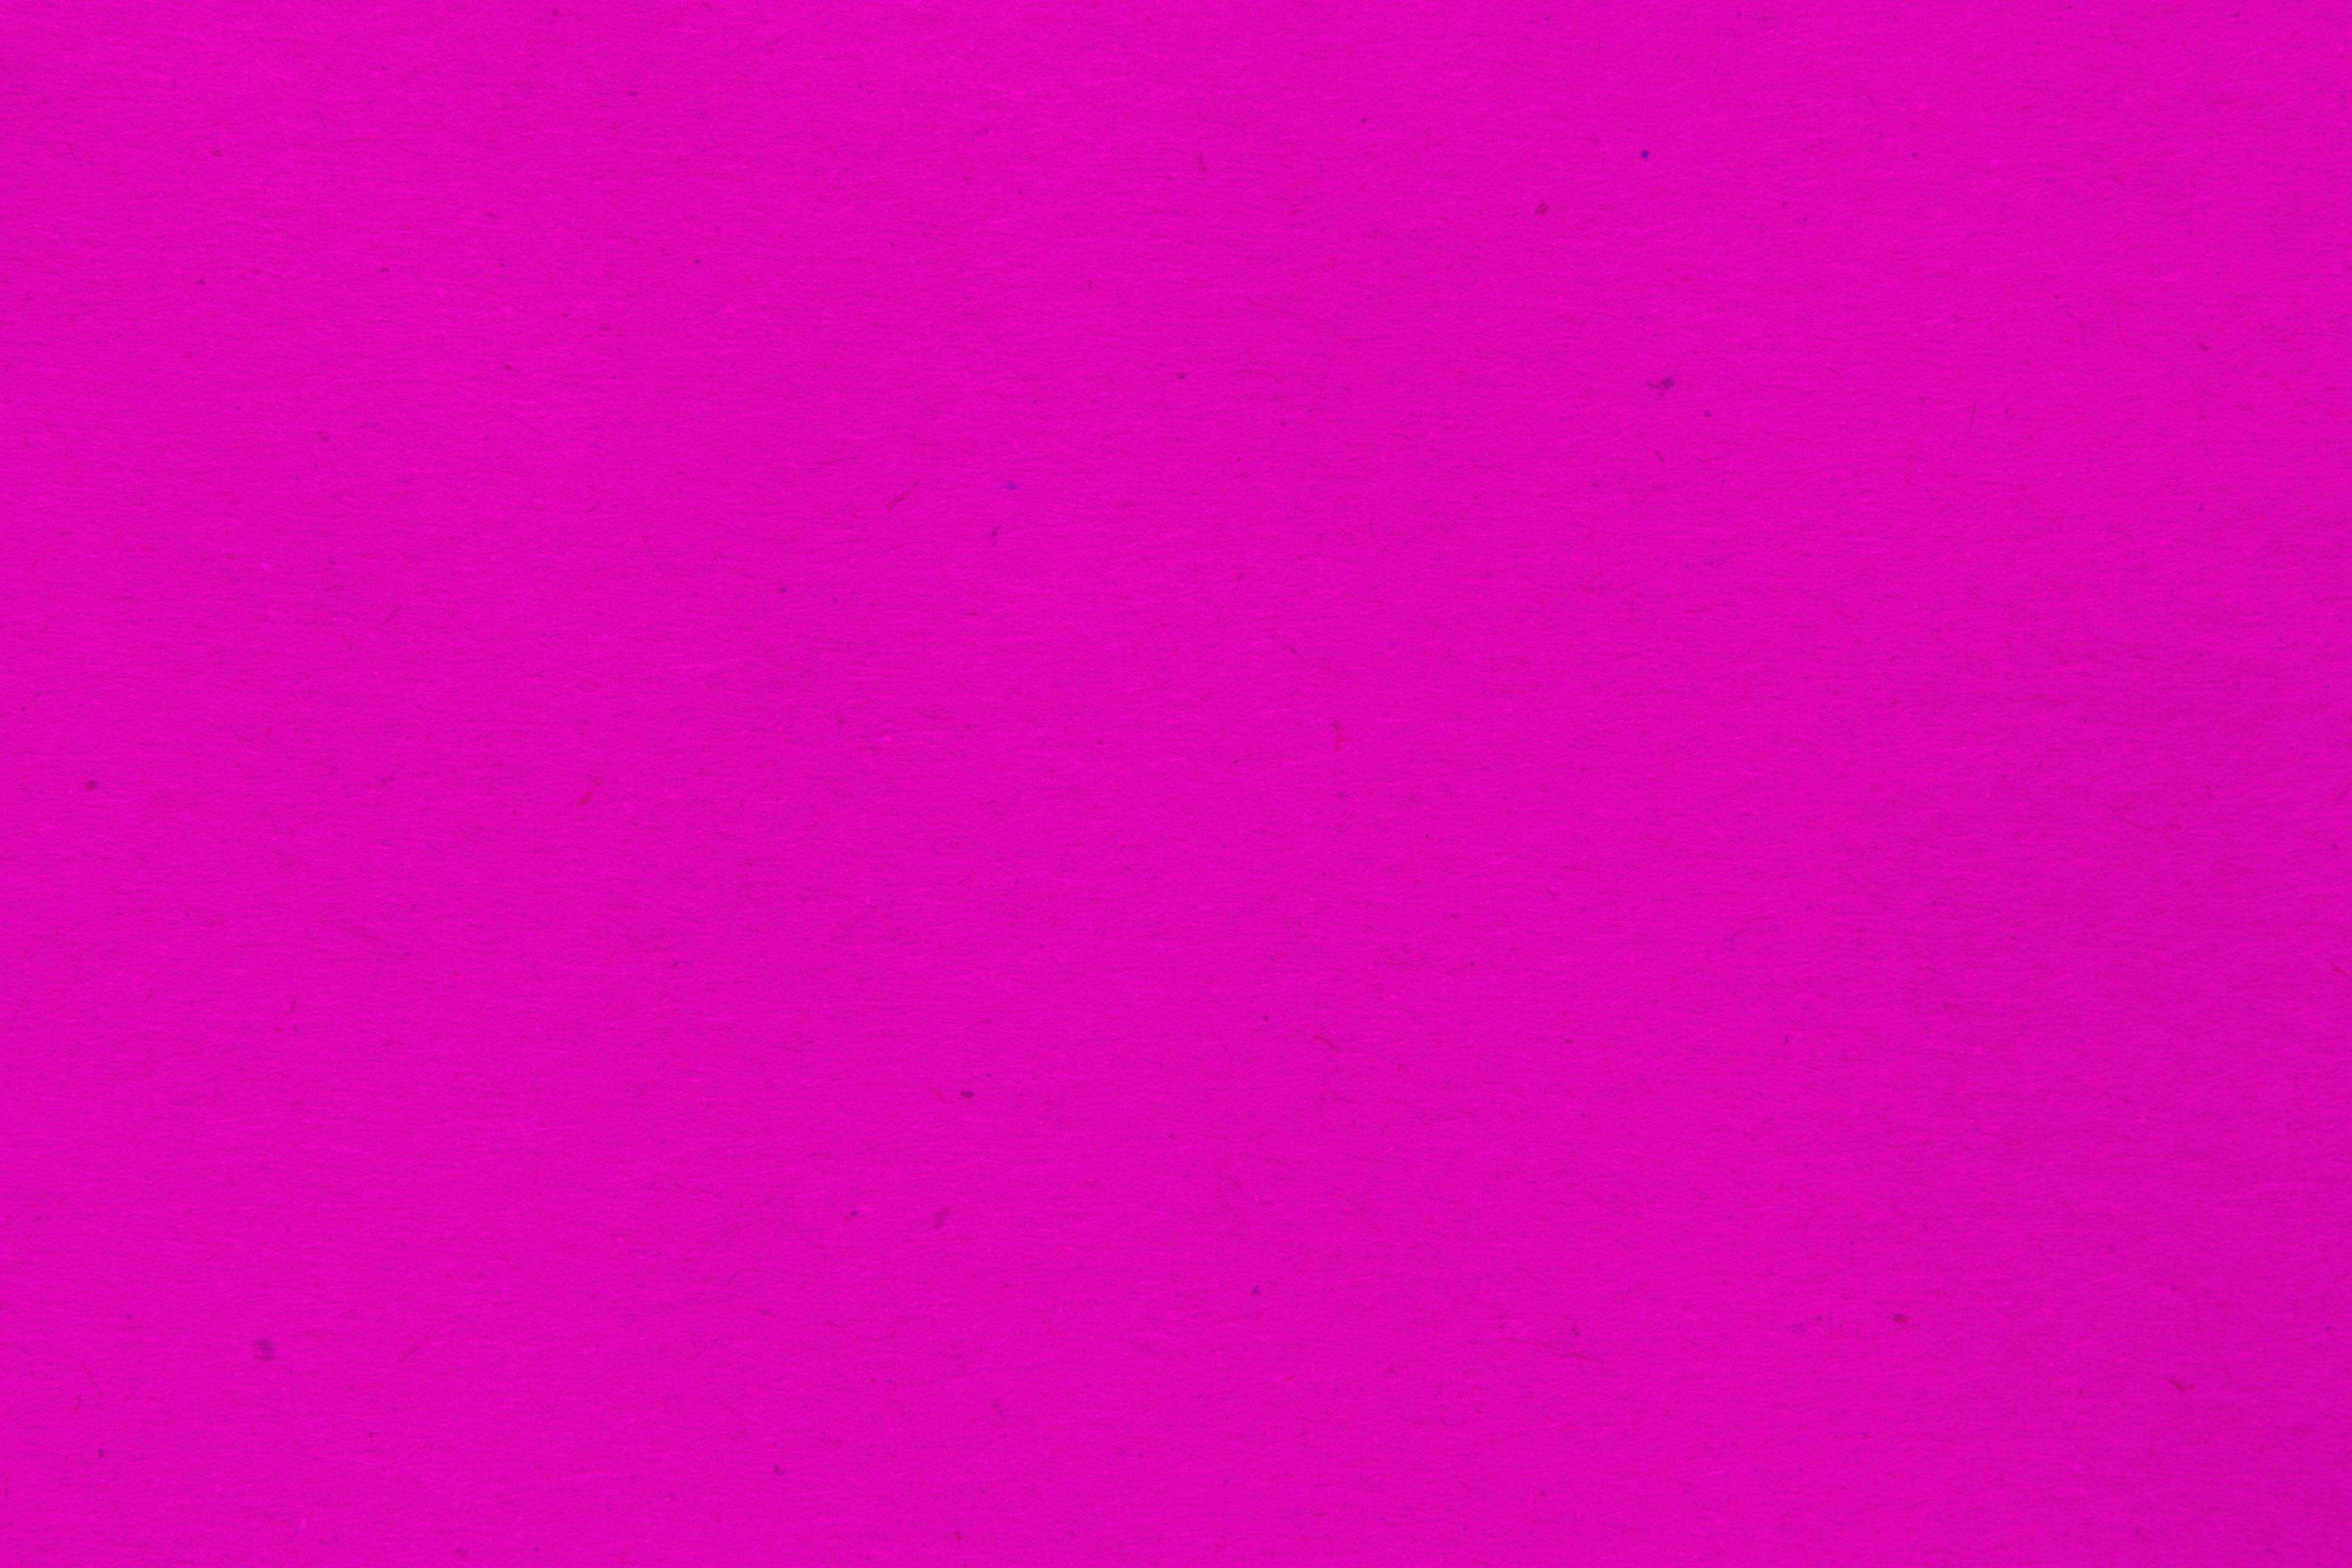 Bright Pink Backgrounds Wallpapers Neon Of Laptop Hd.